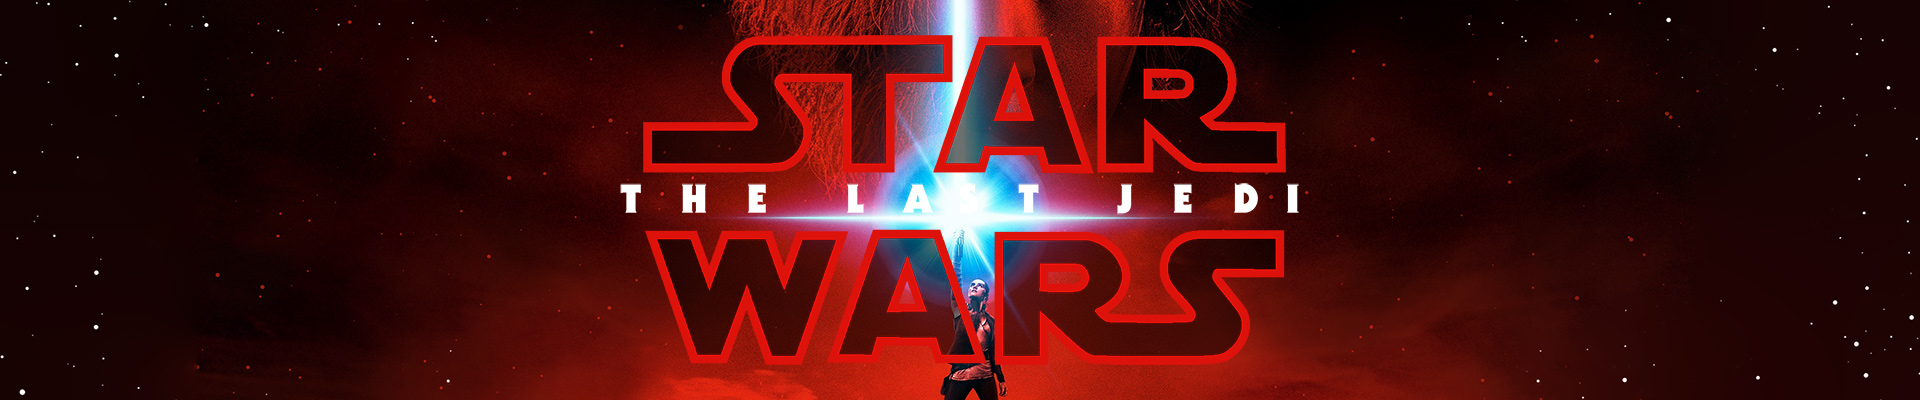 Few thoughts on Star Wars: Episode VIII – The Last Jedi (and Rogue One)